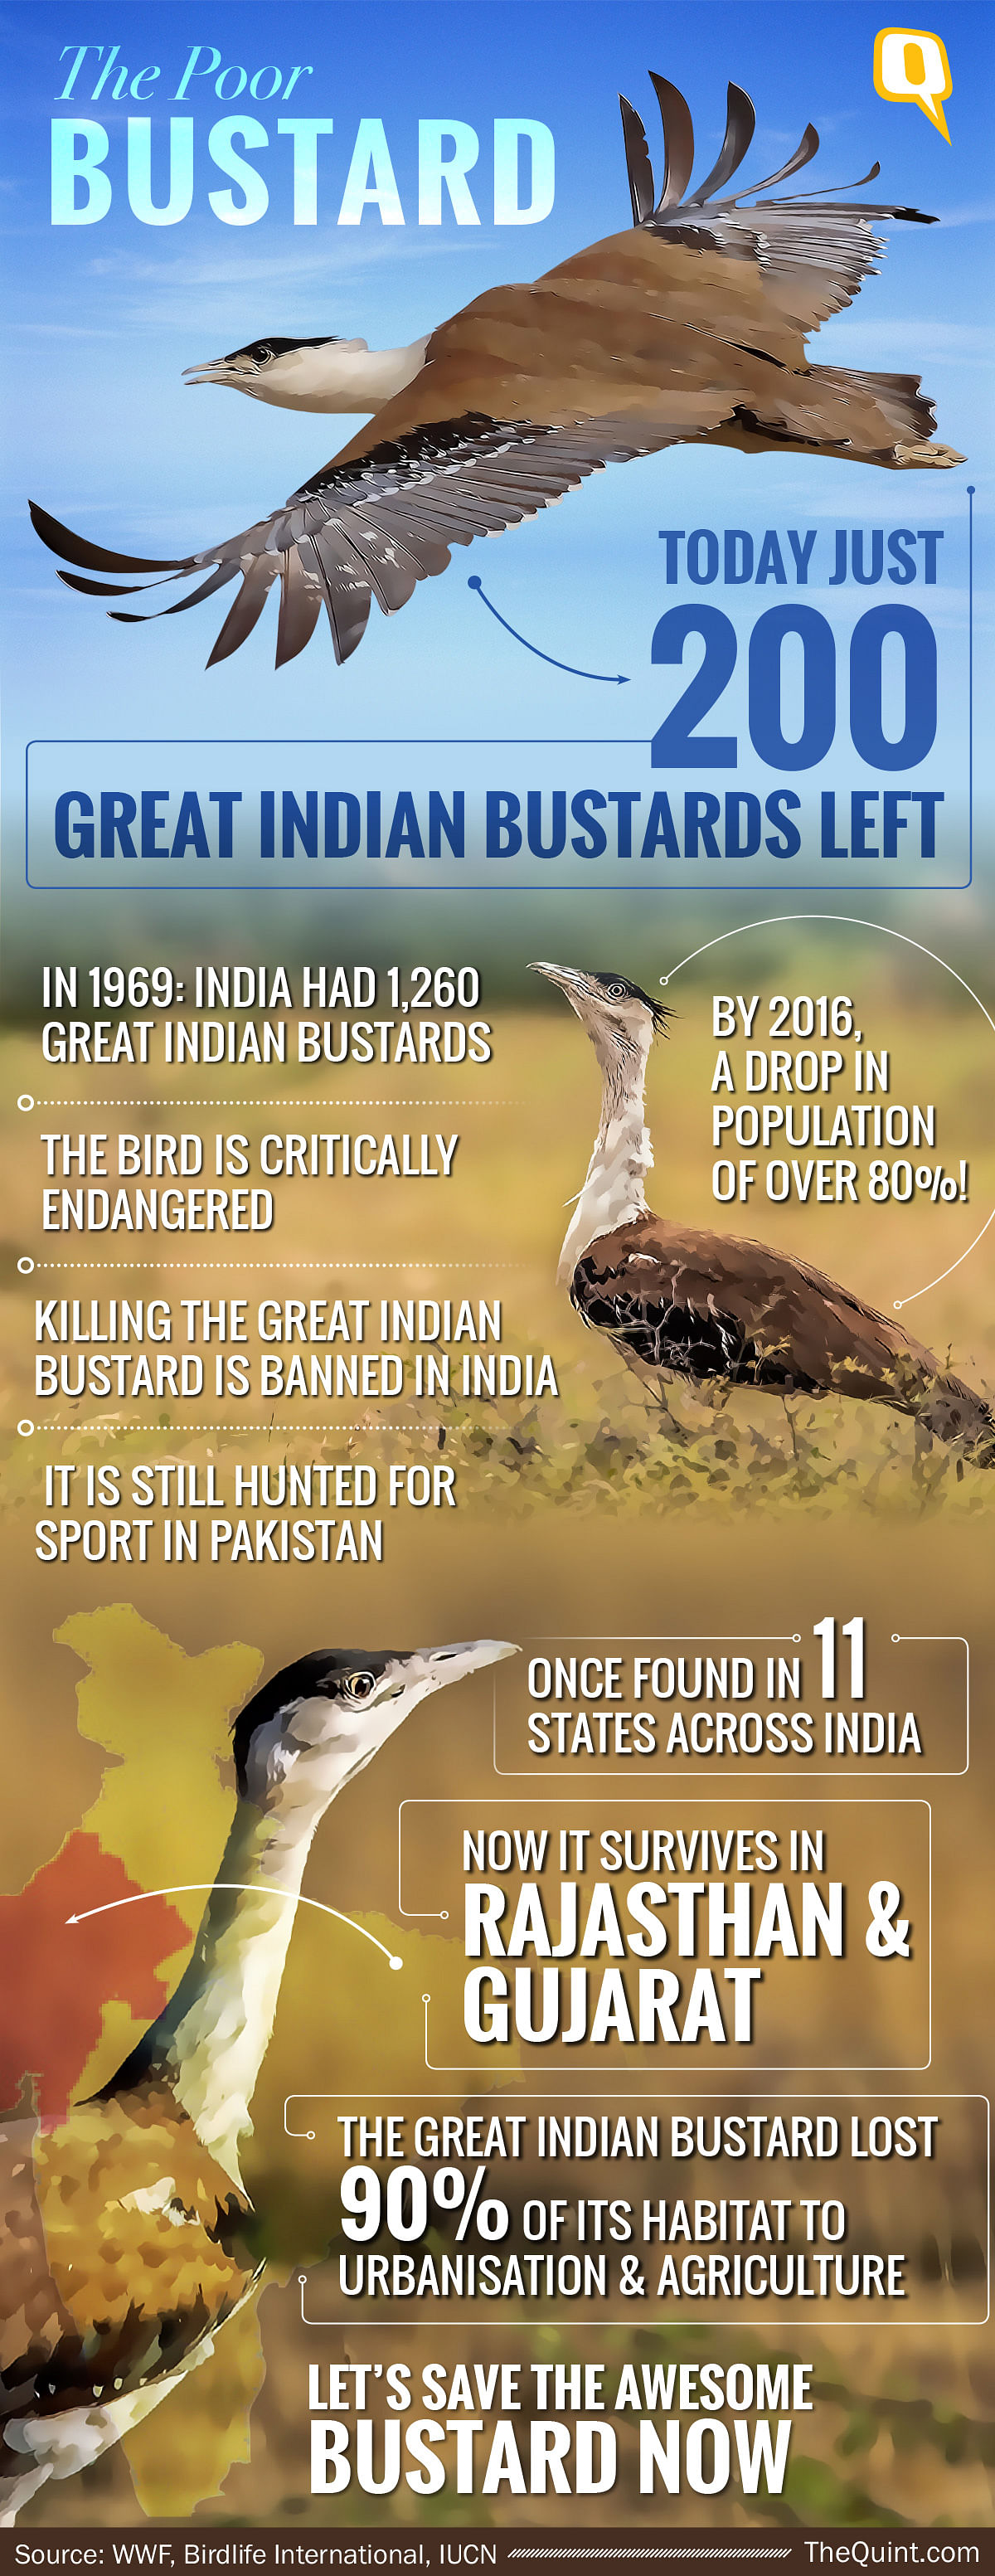 There are fewer than 200 Great Indian Bustards left in the world.  